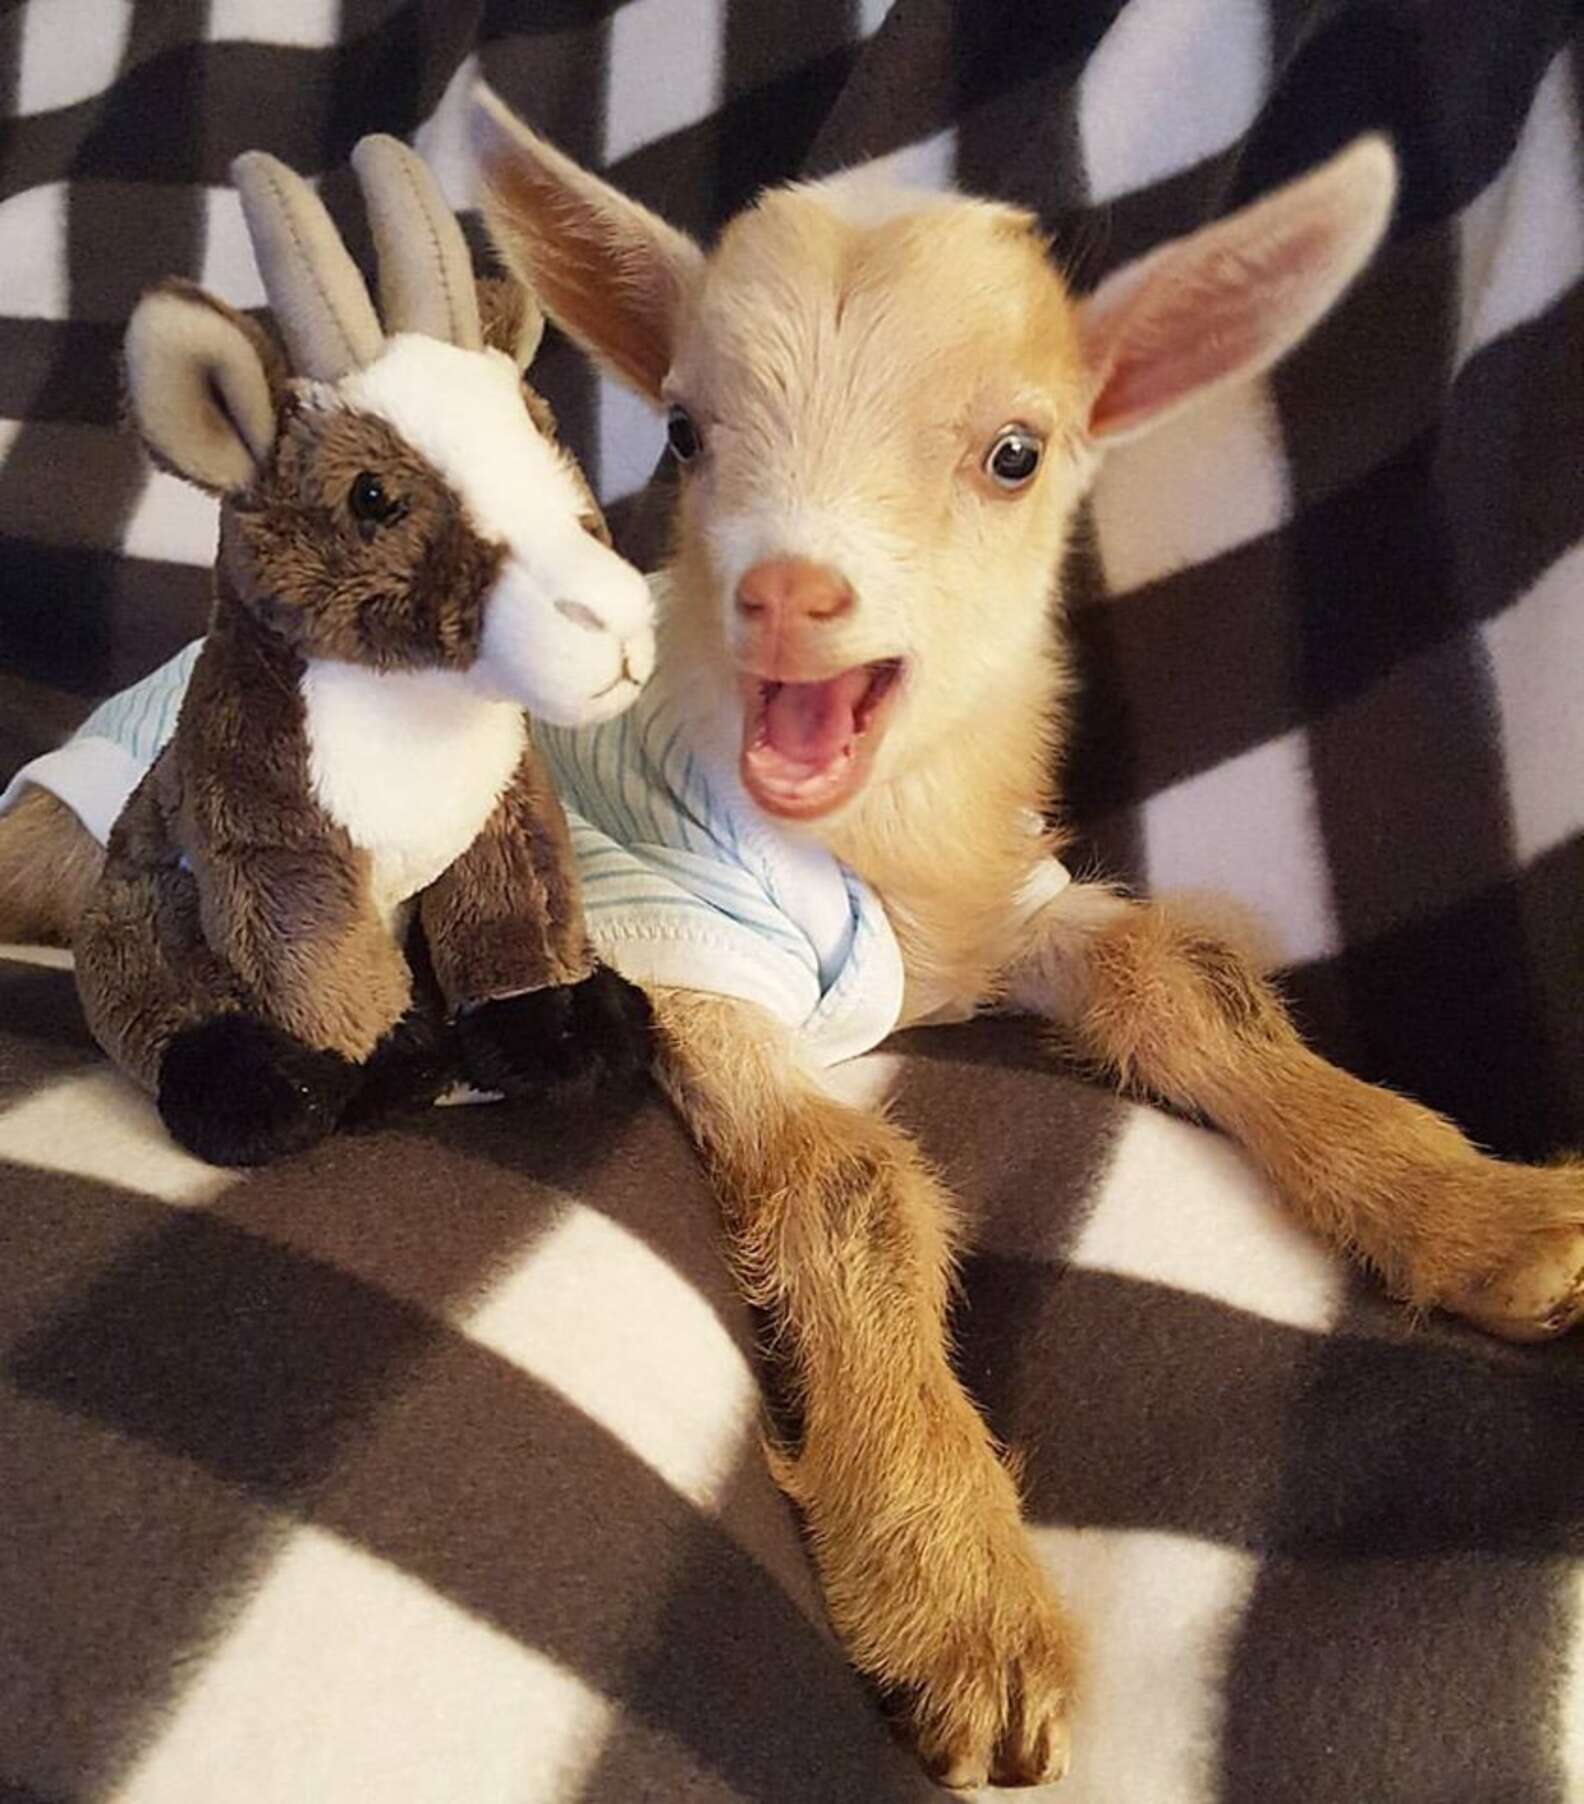 Goat Born Without Back Legs Finds The Perfect Mom To Raise Him - The Dodo